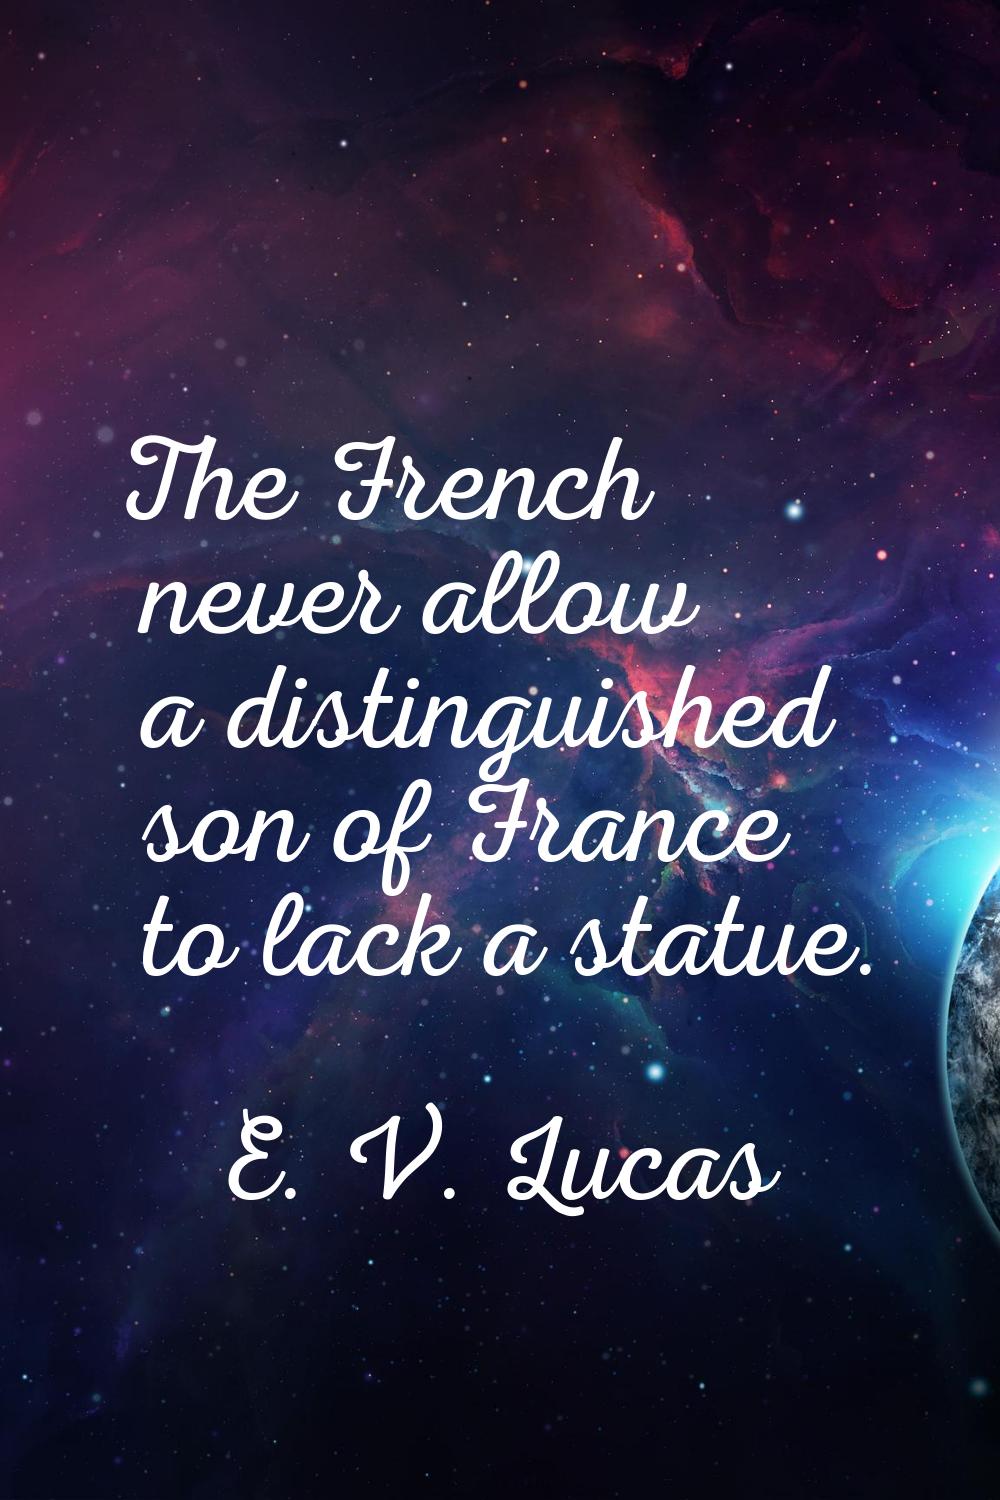 The French never allow a distinguished son of France to lack a statue.